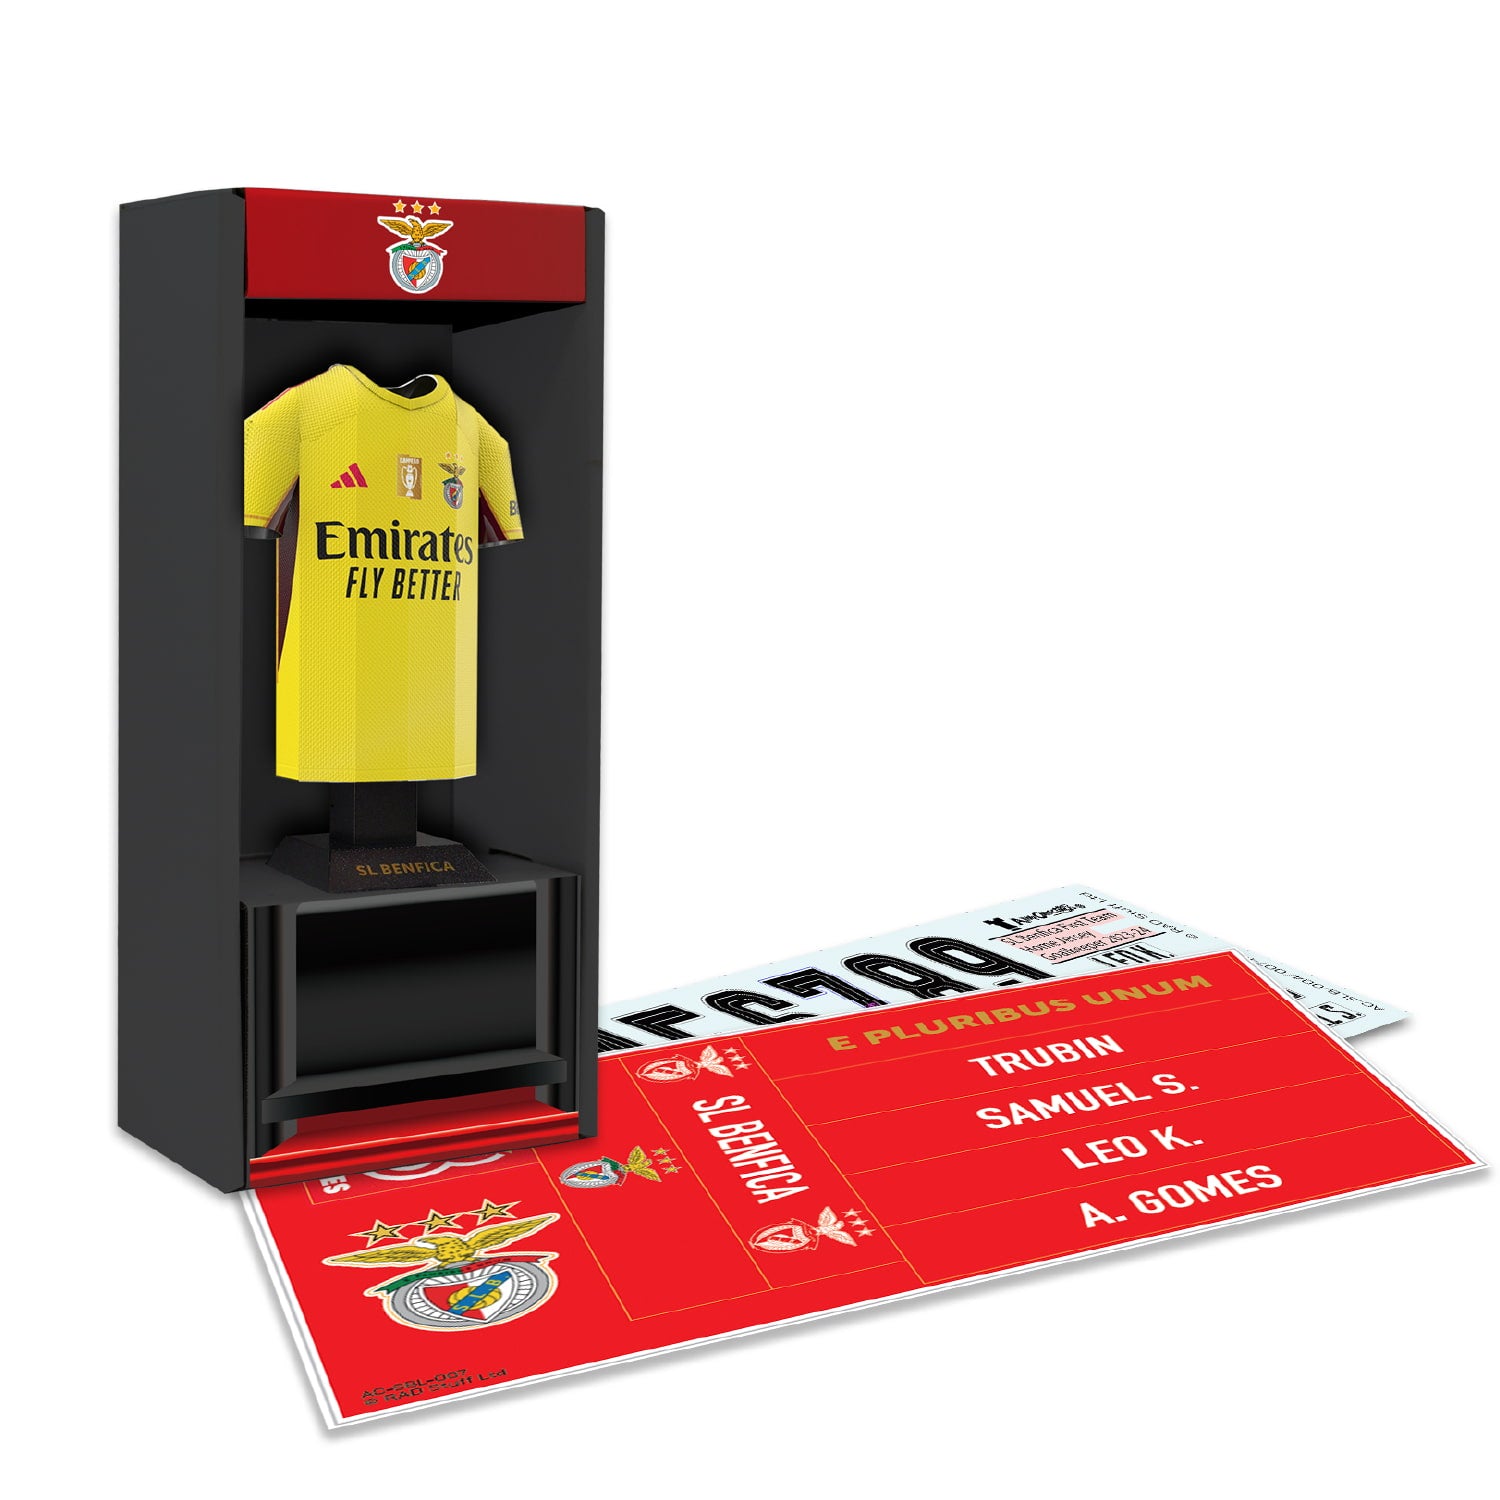 Benfica goalkeeper kit image with locker and stickers